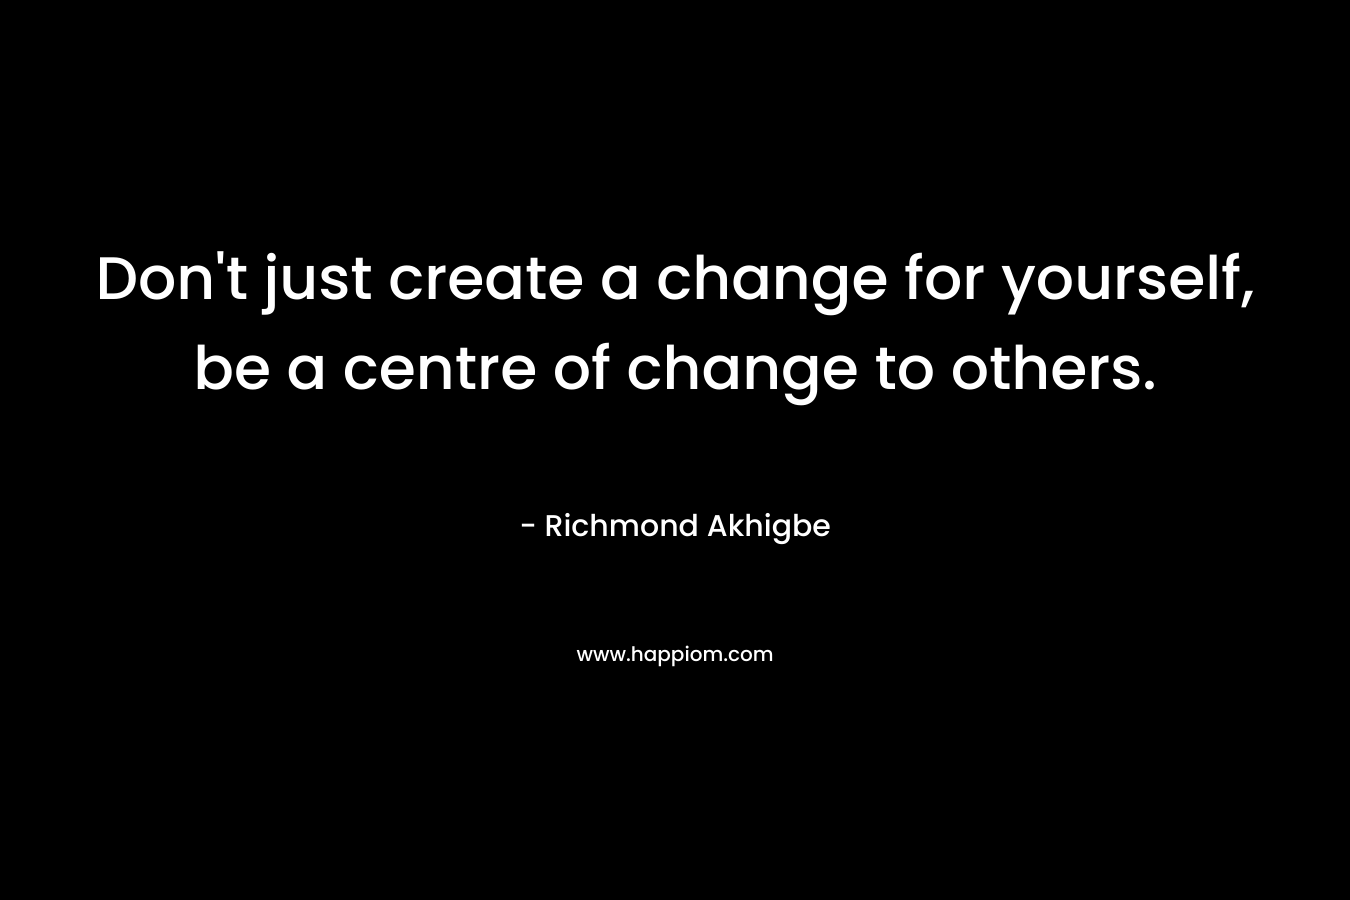 Don't just create a change for yourself, be a centre of change to others.